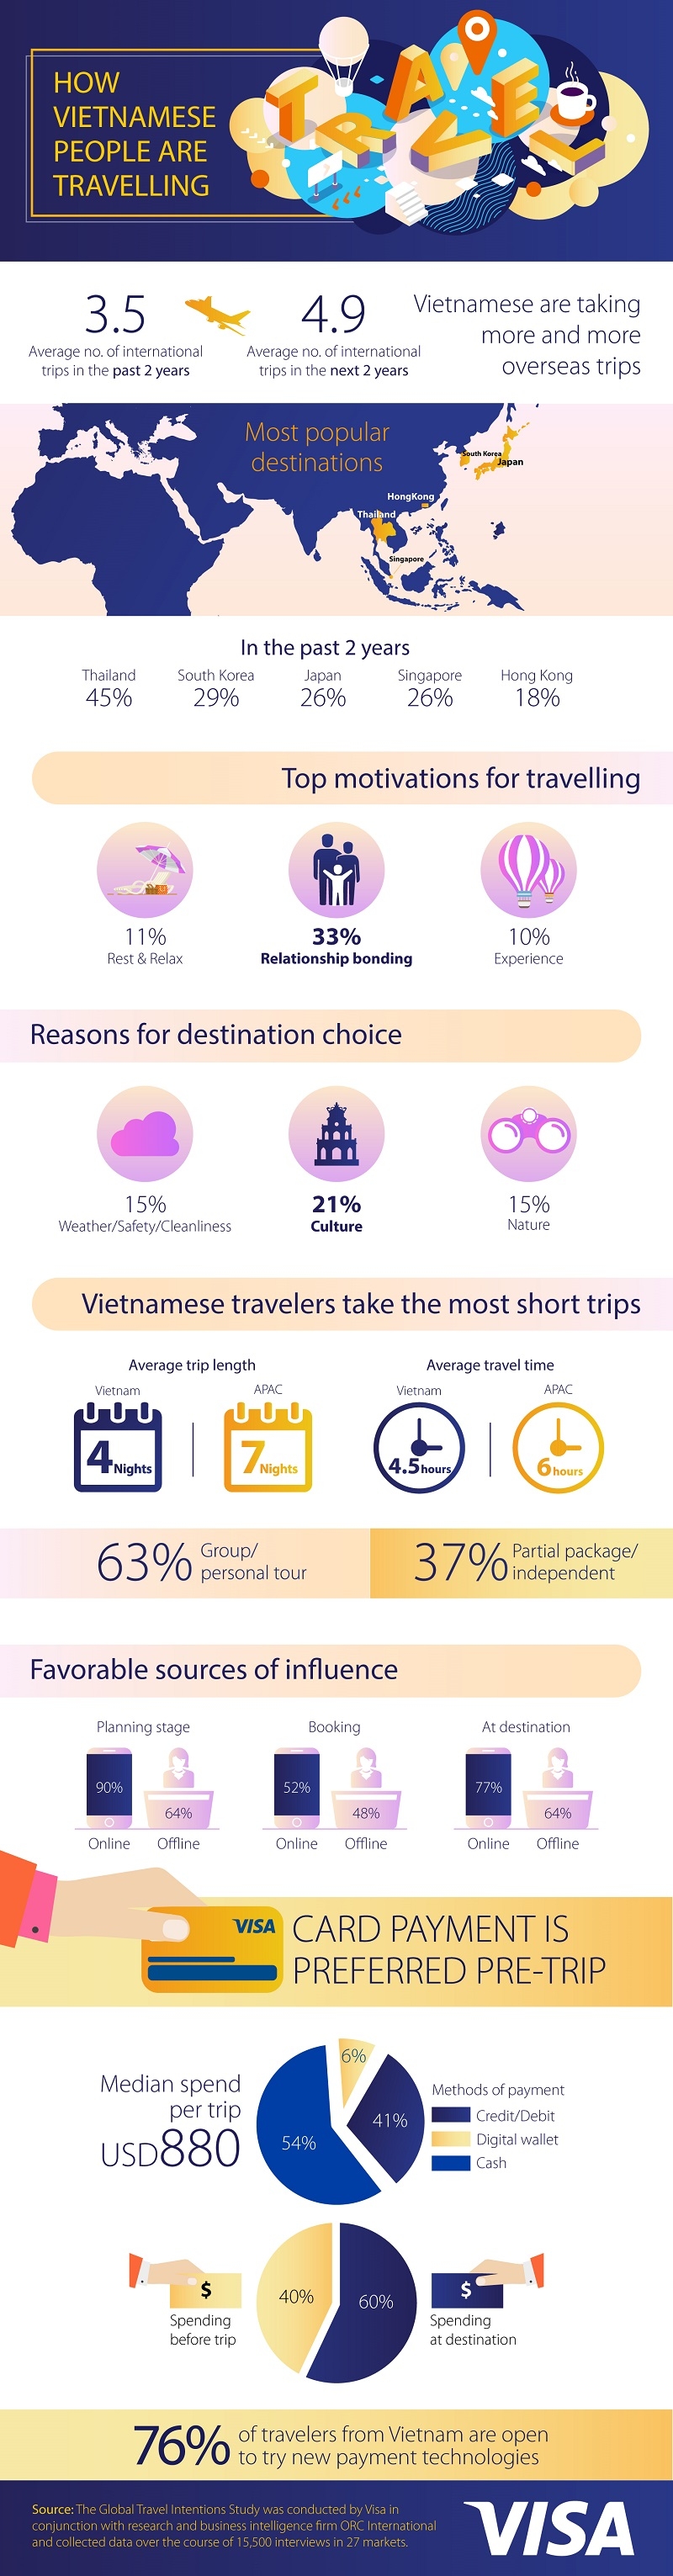 how vietnamese people are travelling